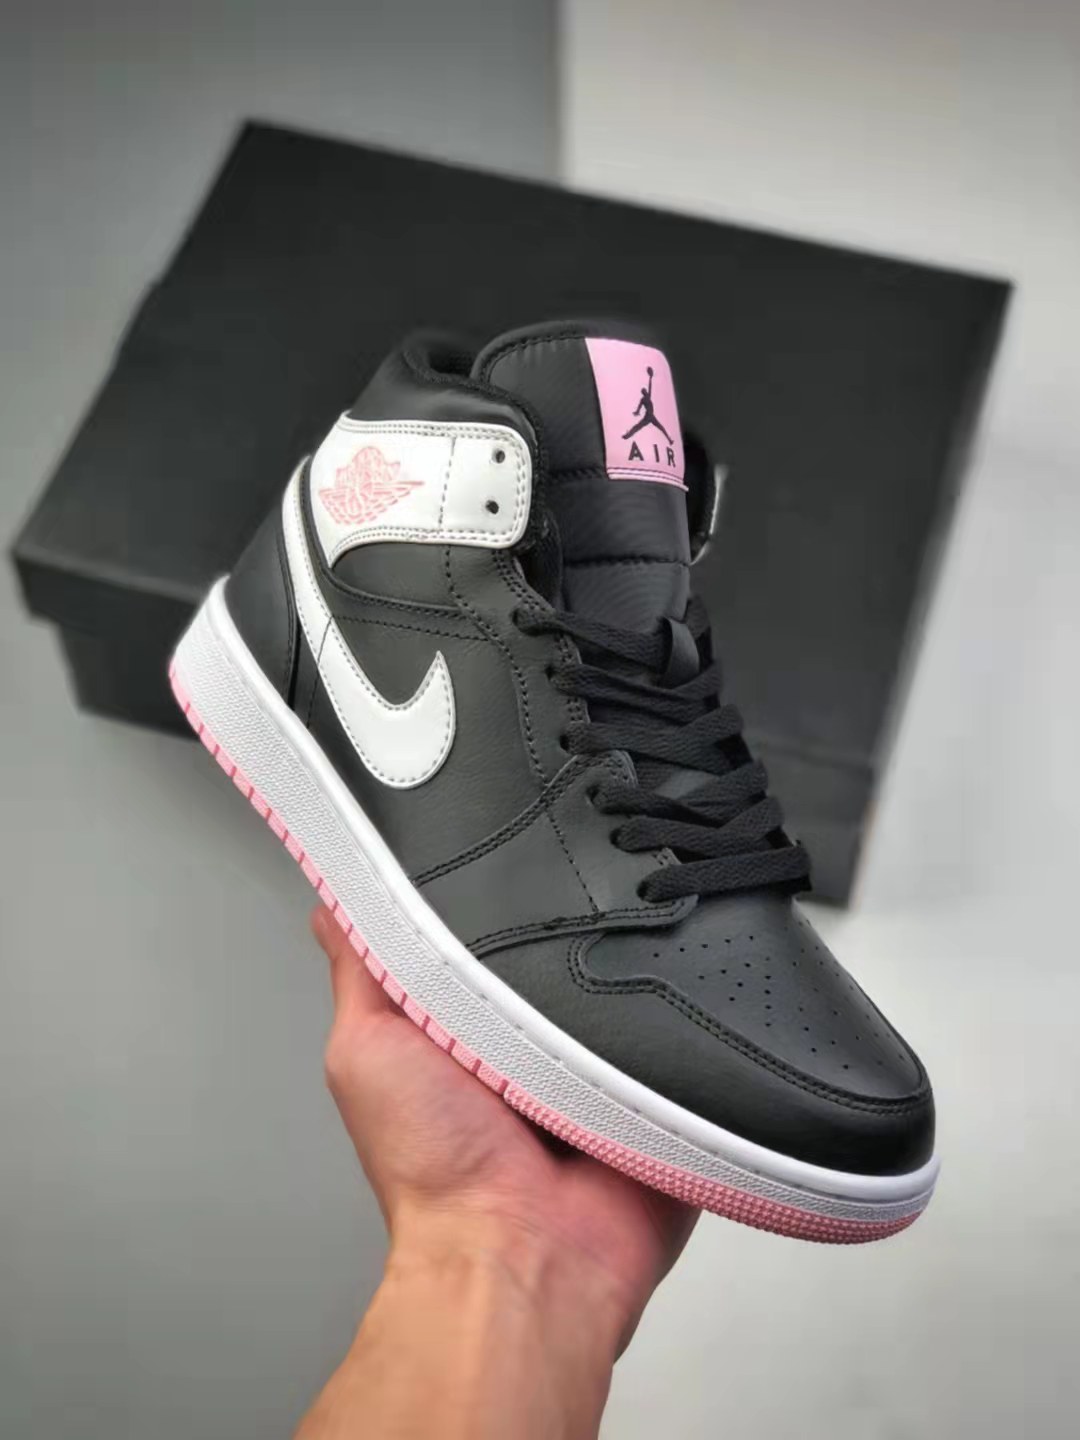 Air Jordan 1 Mid 'Arctic Punch' 555112-061 - Stylish and Trendy Sneakers